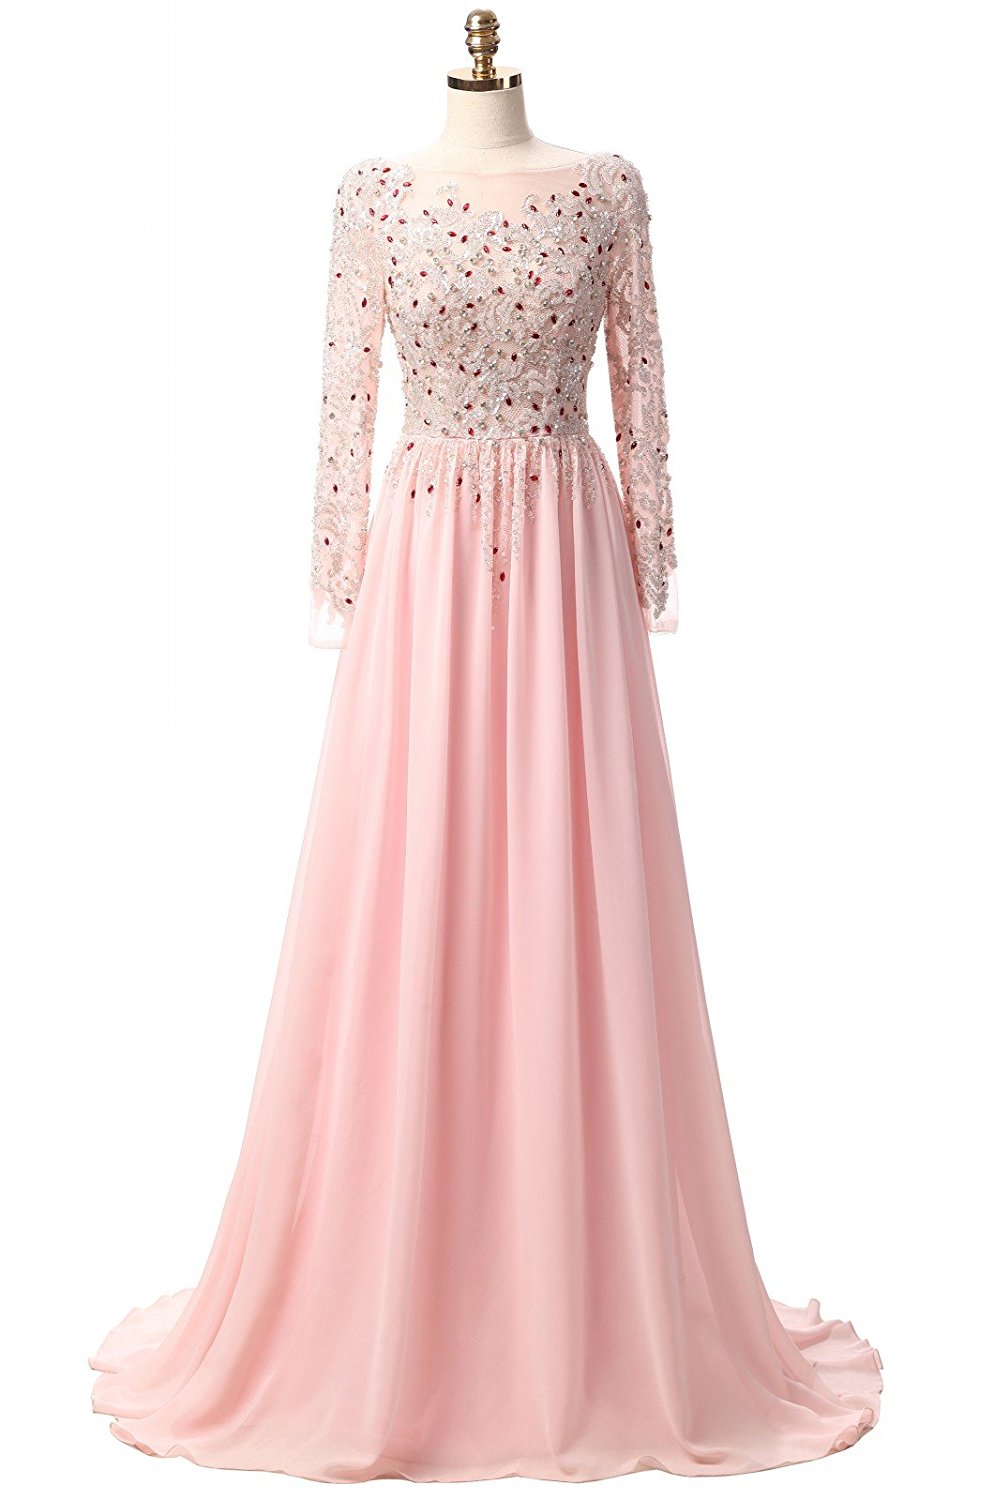 Women's Pink Lace Appliques Bridesmaid Dress Beaded Chiffon Prom ...